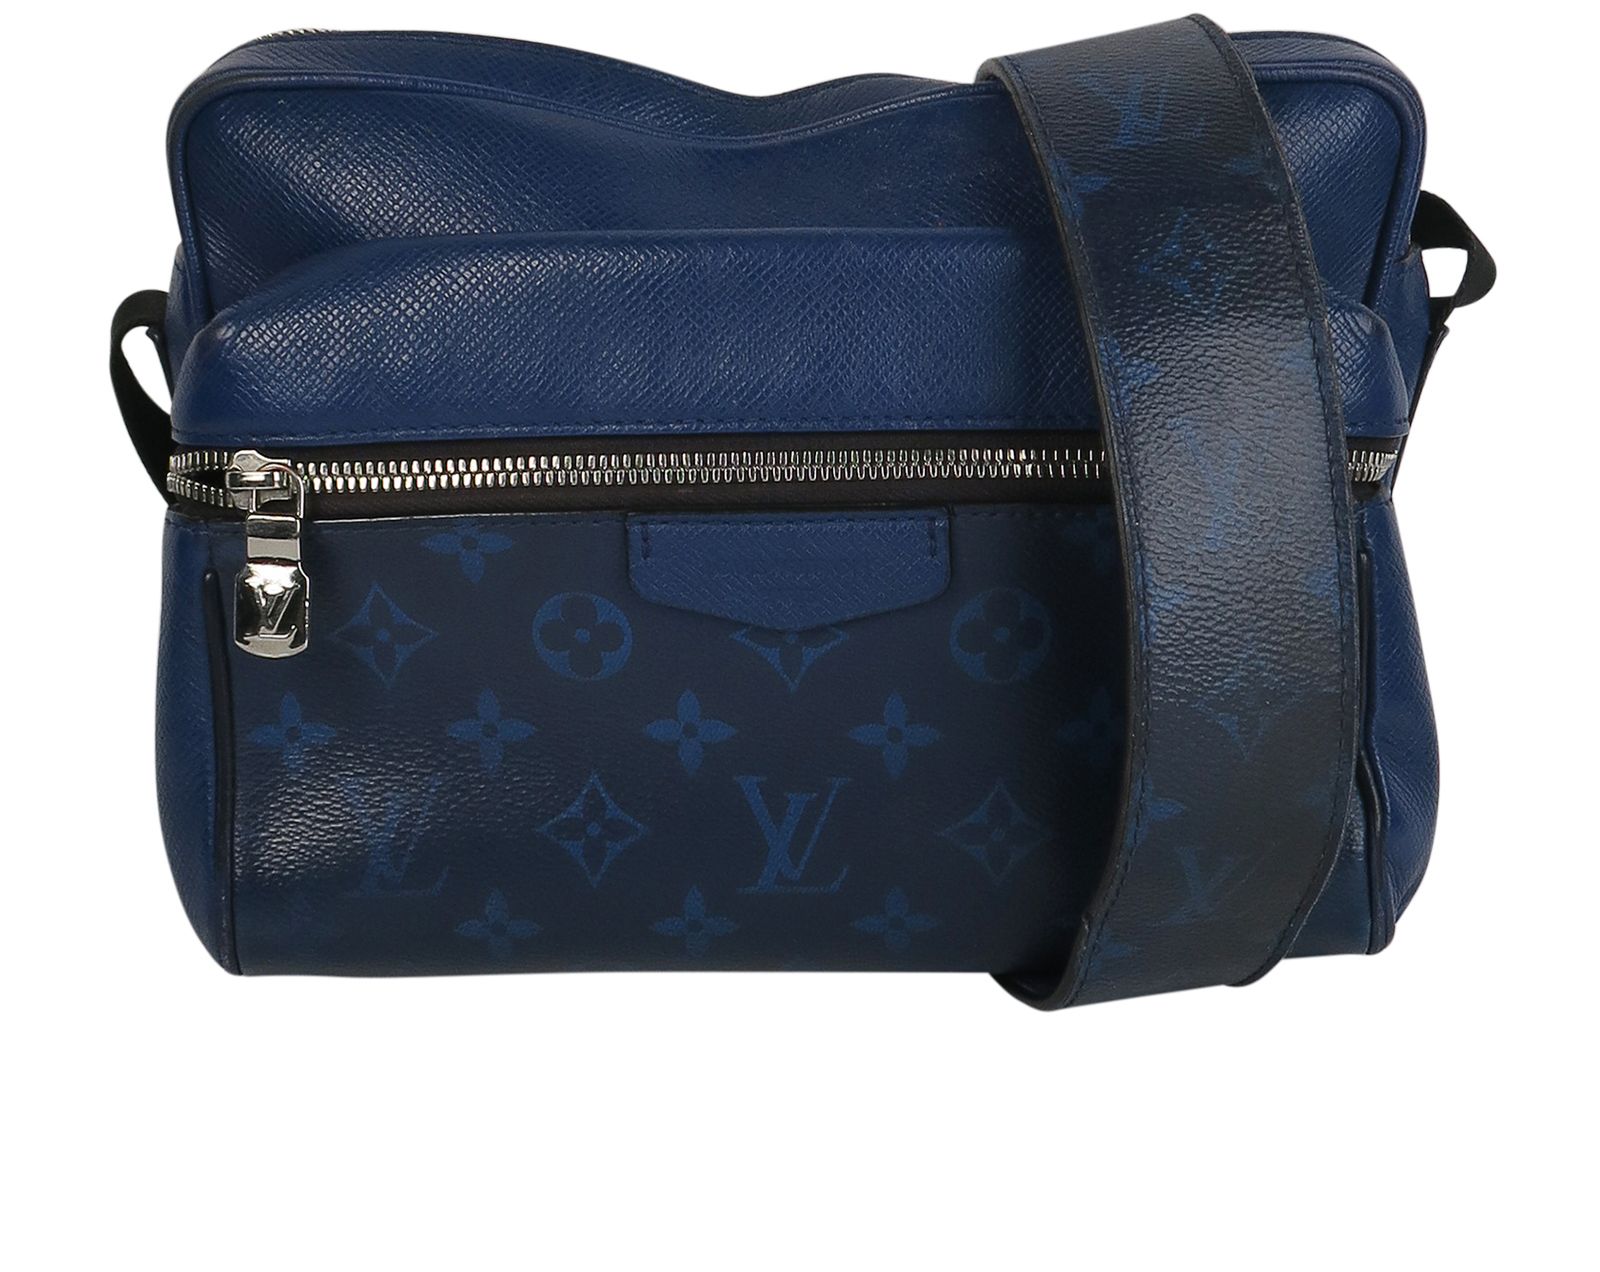 What fits in my LOUIS VUITTON ALPHA MESSENGER BAG?, Limited Edition, Review